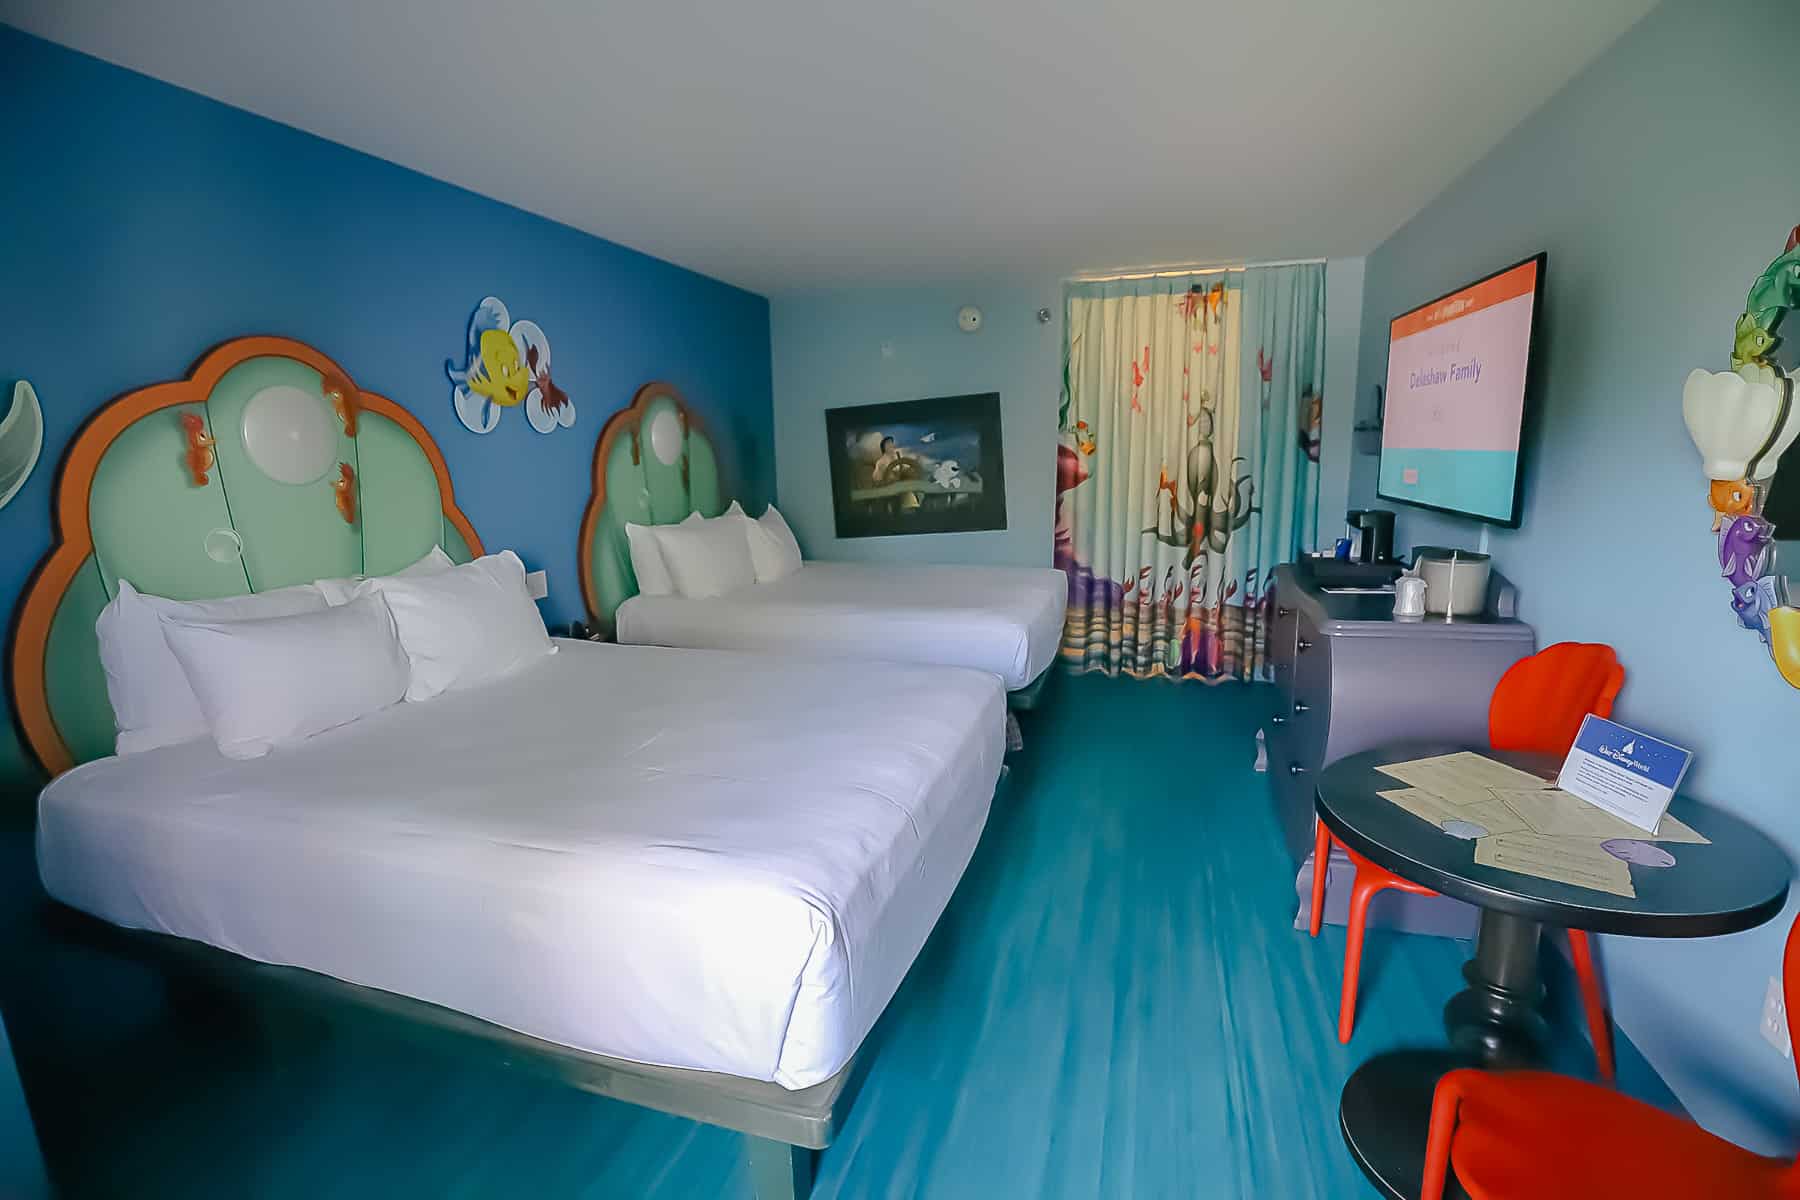 Shows the standard guest room at Art of Animation with curtains closed to the bath area. 